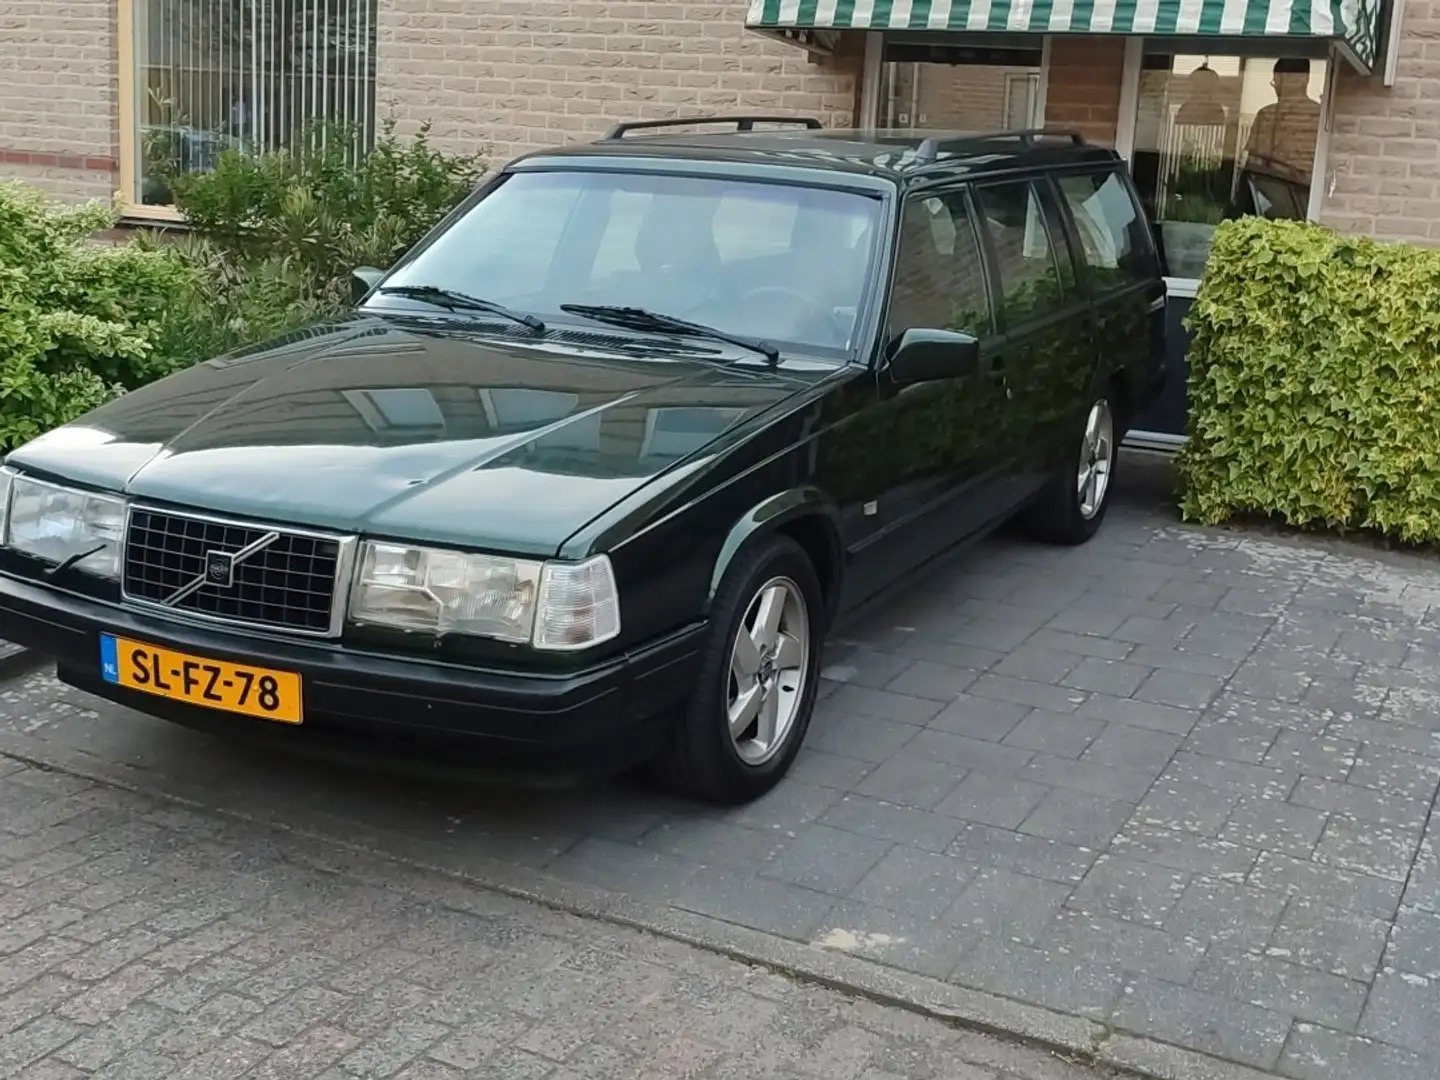 Volvo 940 2.3 limited lpt 97 Green - 1